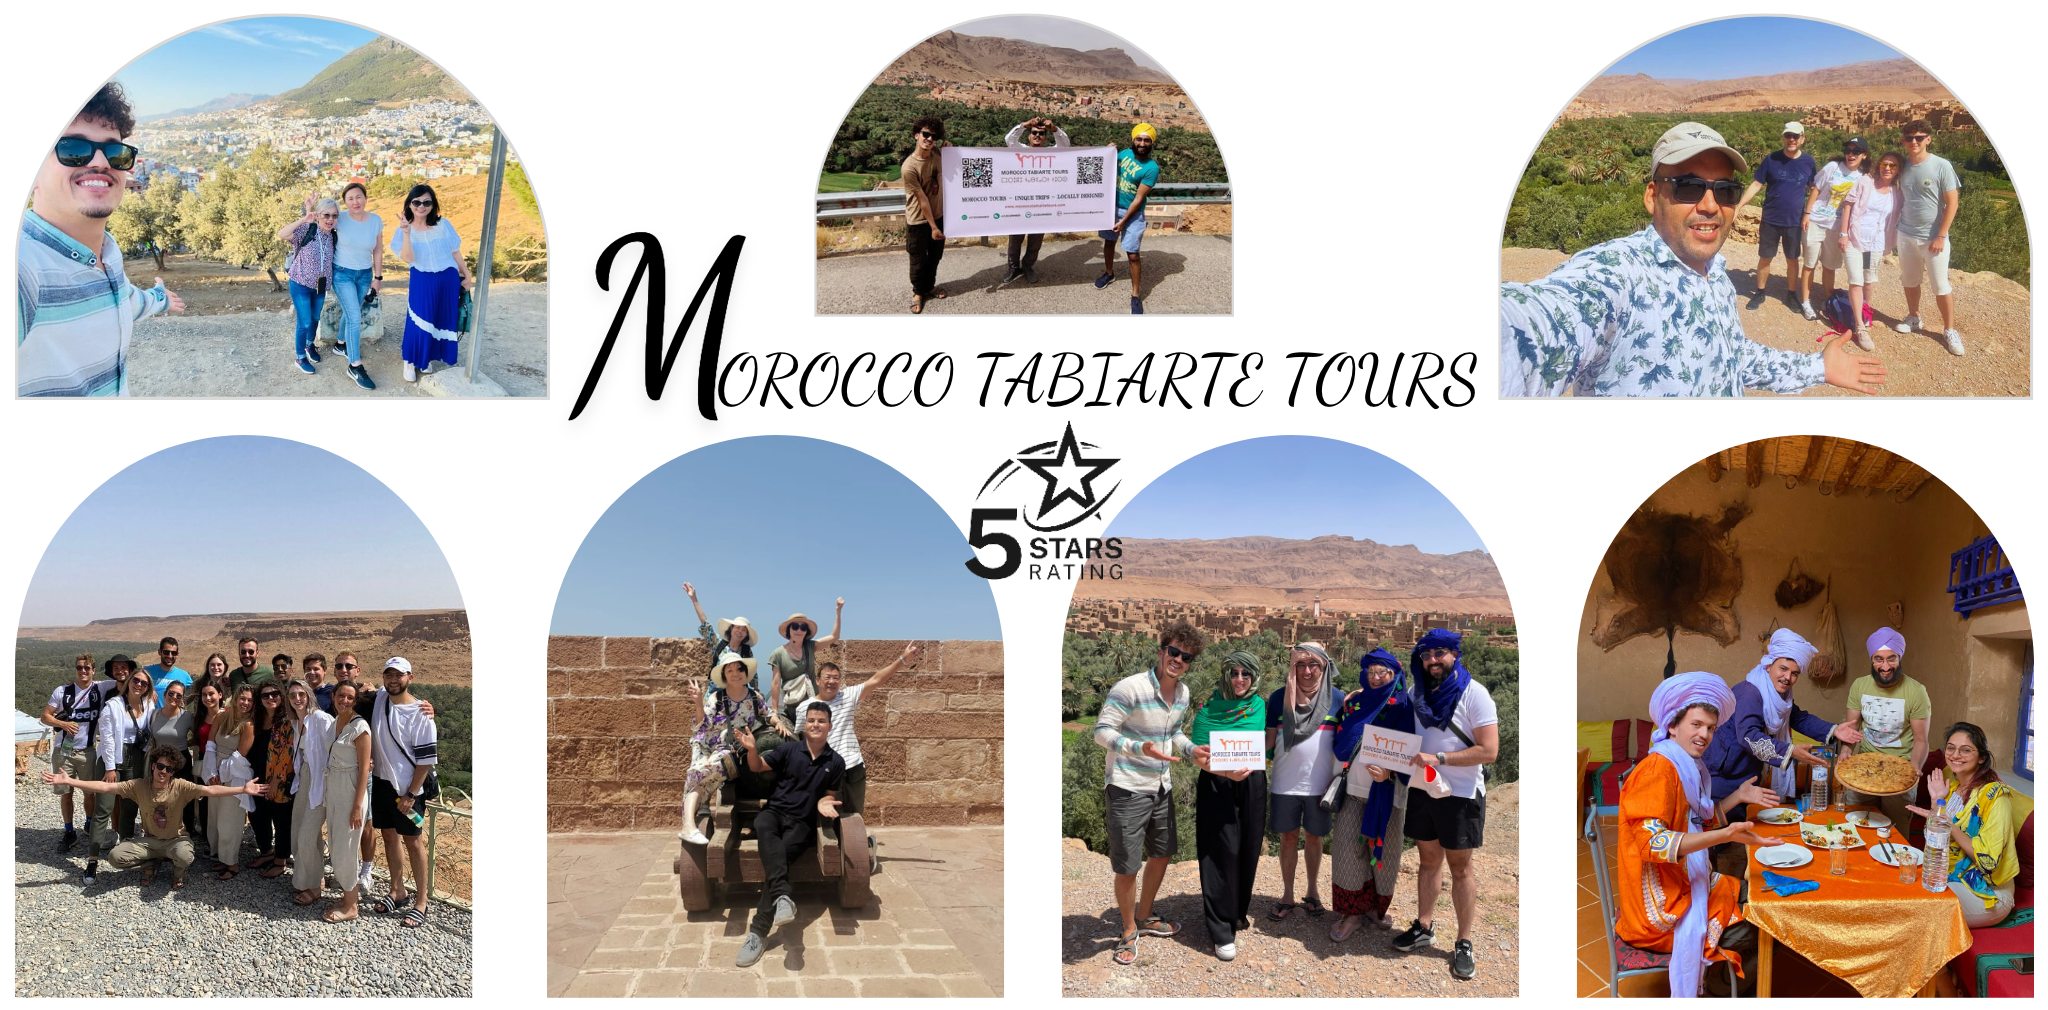 BEST Morocco Tabiarte Tours Reviews | Private Tour Company